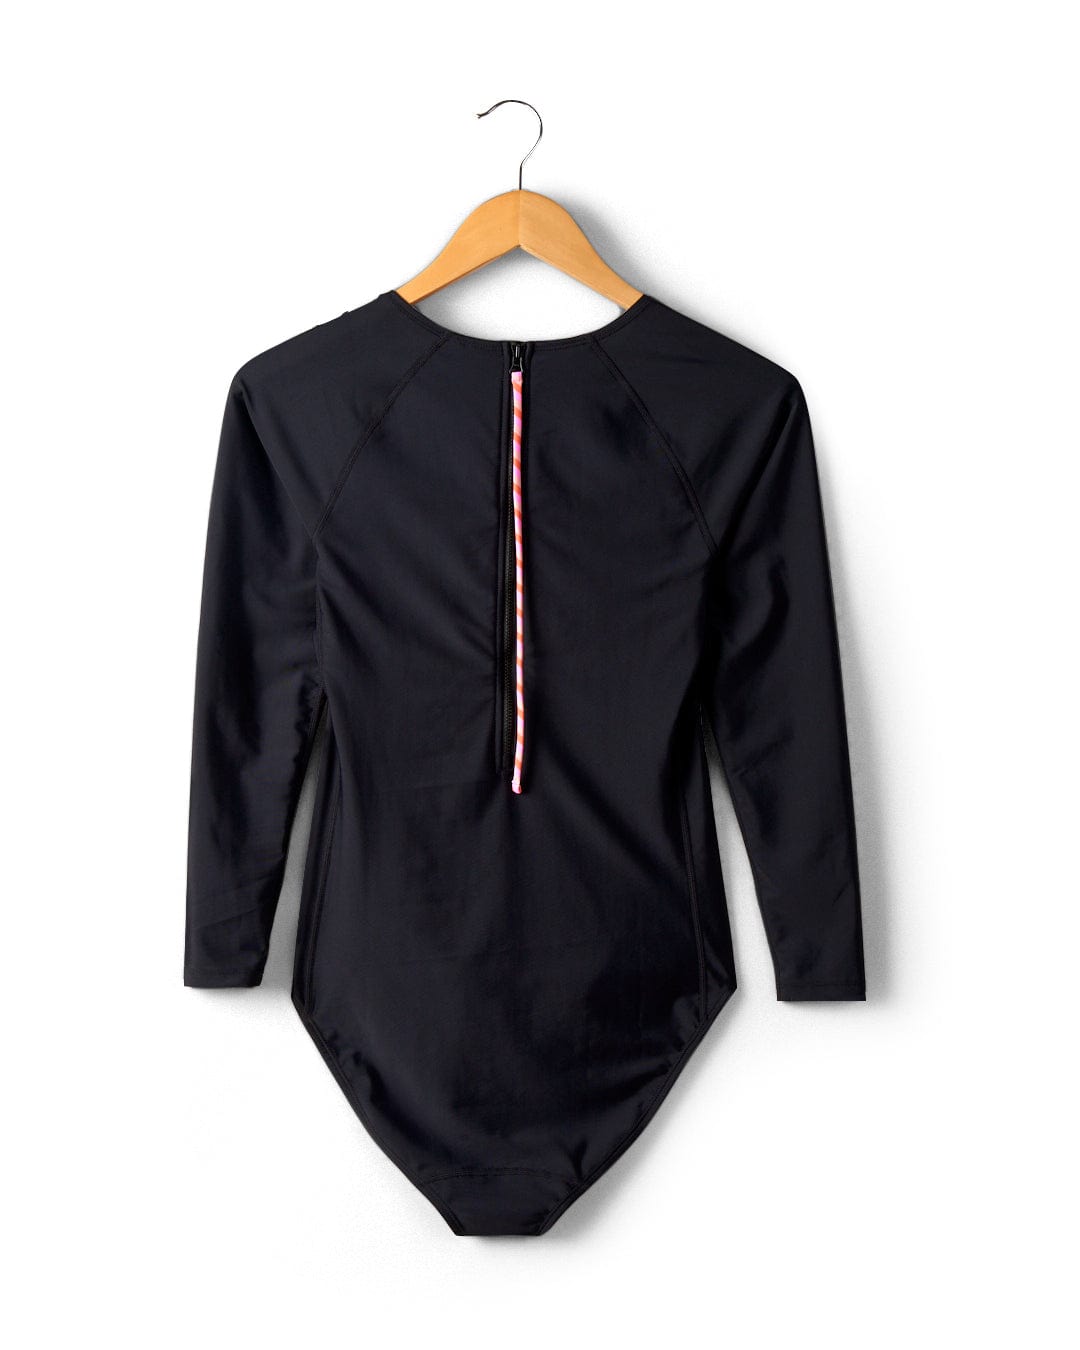 A Cora Retro - Recycled Womens Long Sleeve Swimsuit in Dark Grey with a colorful zipper down the back, hanging on a wooden hanger against a white wall.